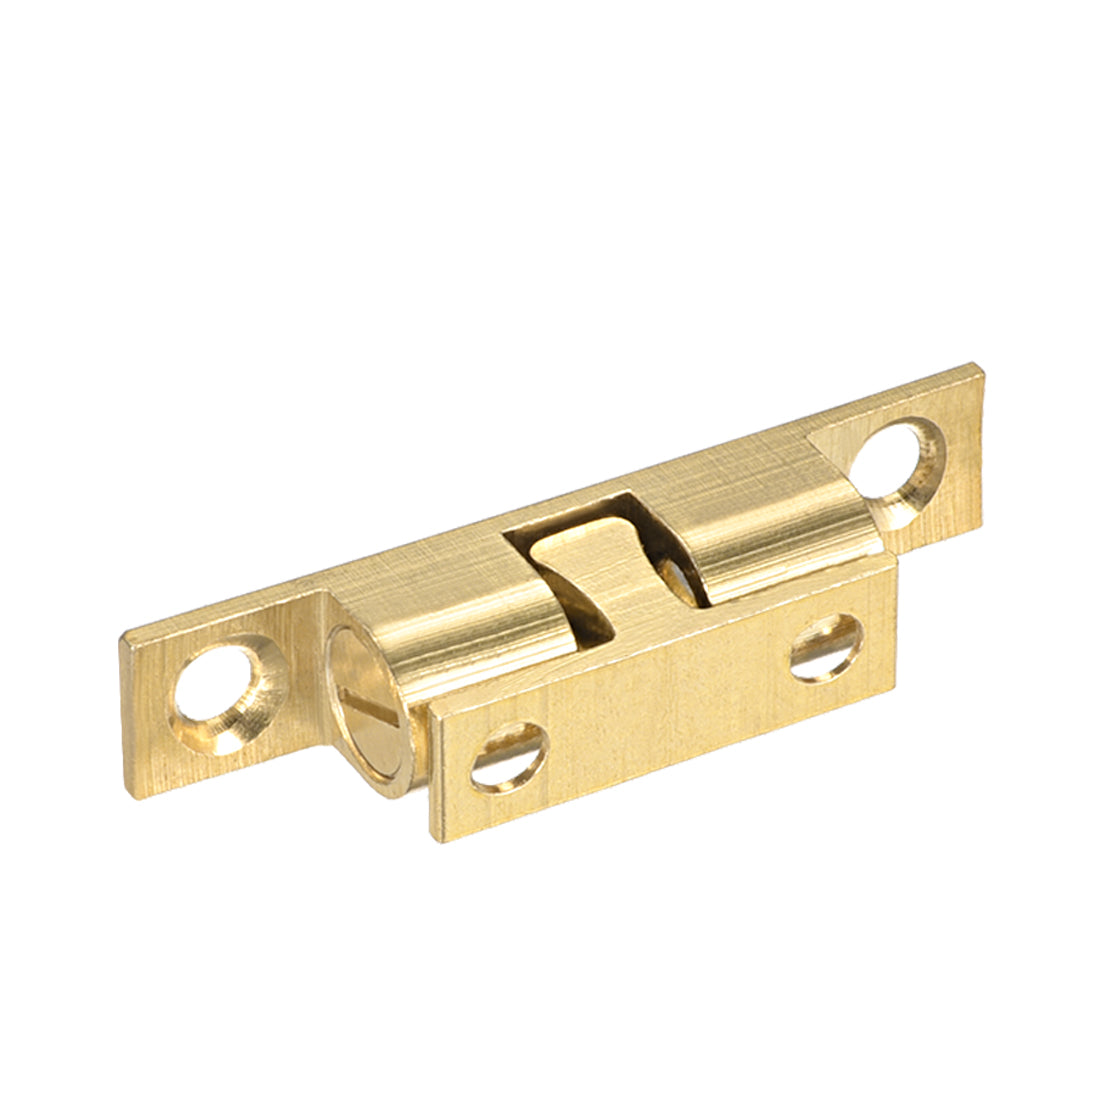 uxcell Uxcell Cabinet Door Closet Brass Double Ball Catch Tension Latch 50mm Length Gold Tone 5pcs